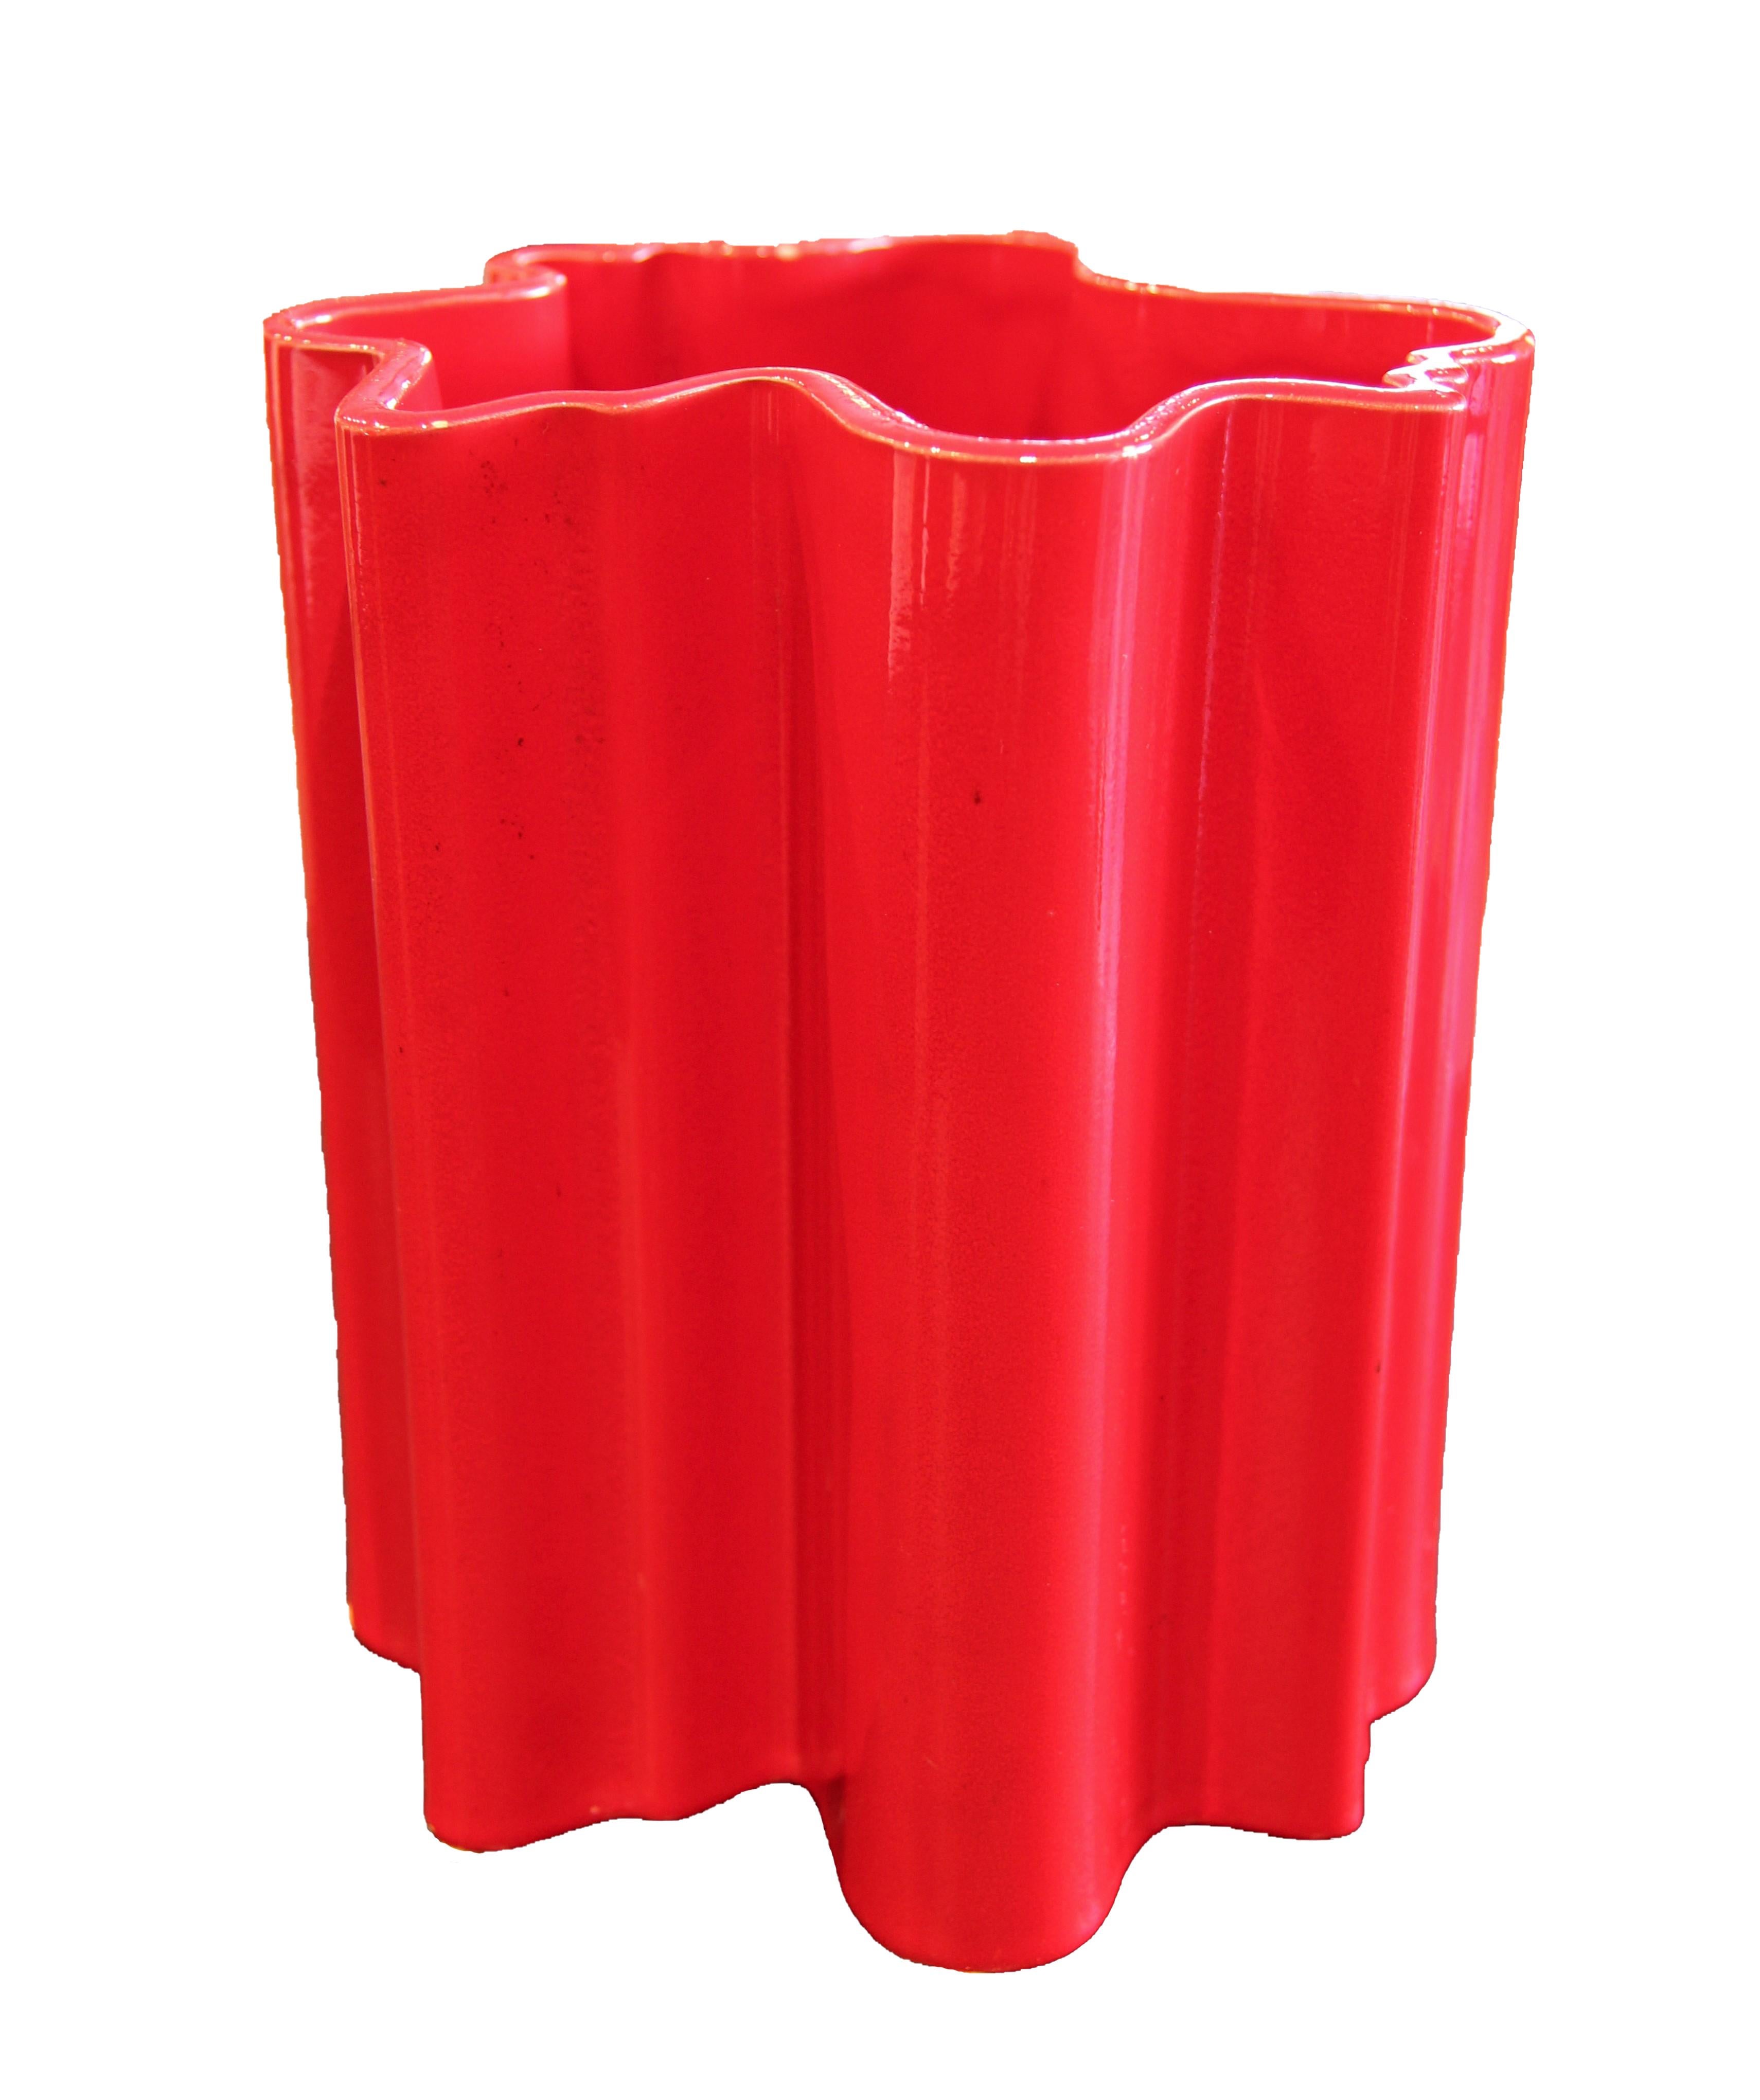 Mid-Century Modern Pair of Red Wavy Ceramic Vases by Angelo Mangiarotti for Fratelli Brambilla